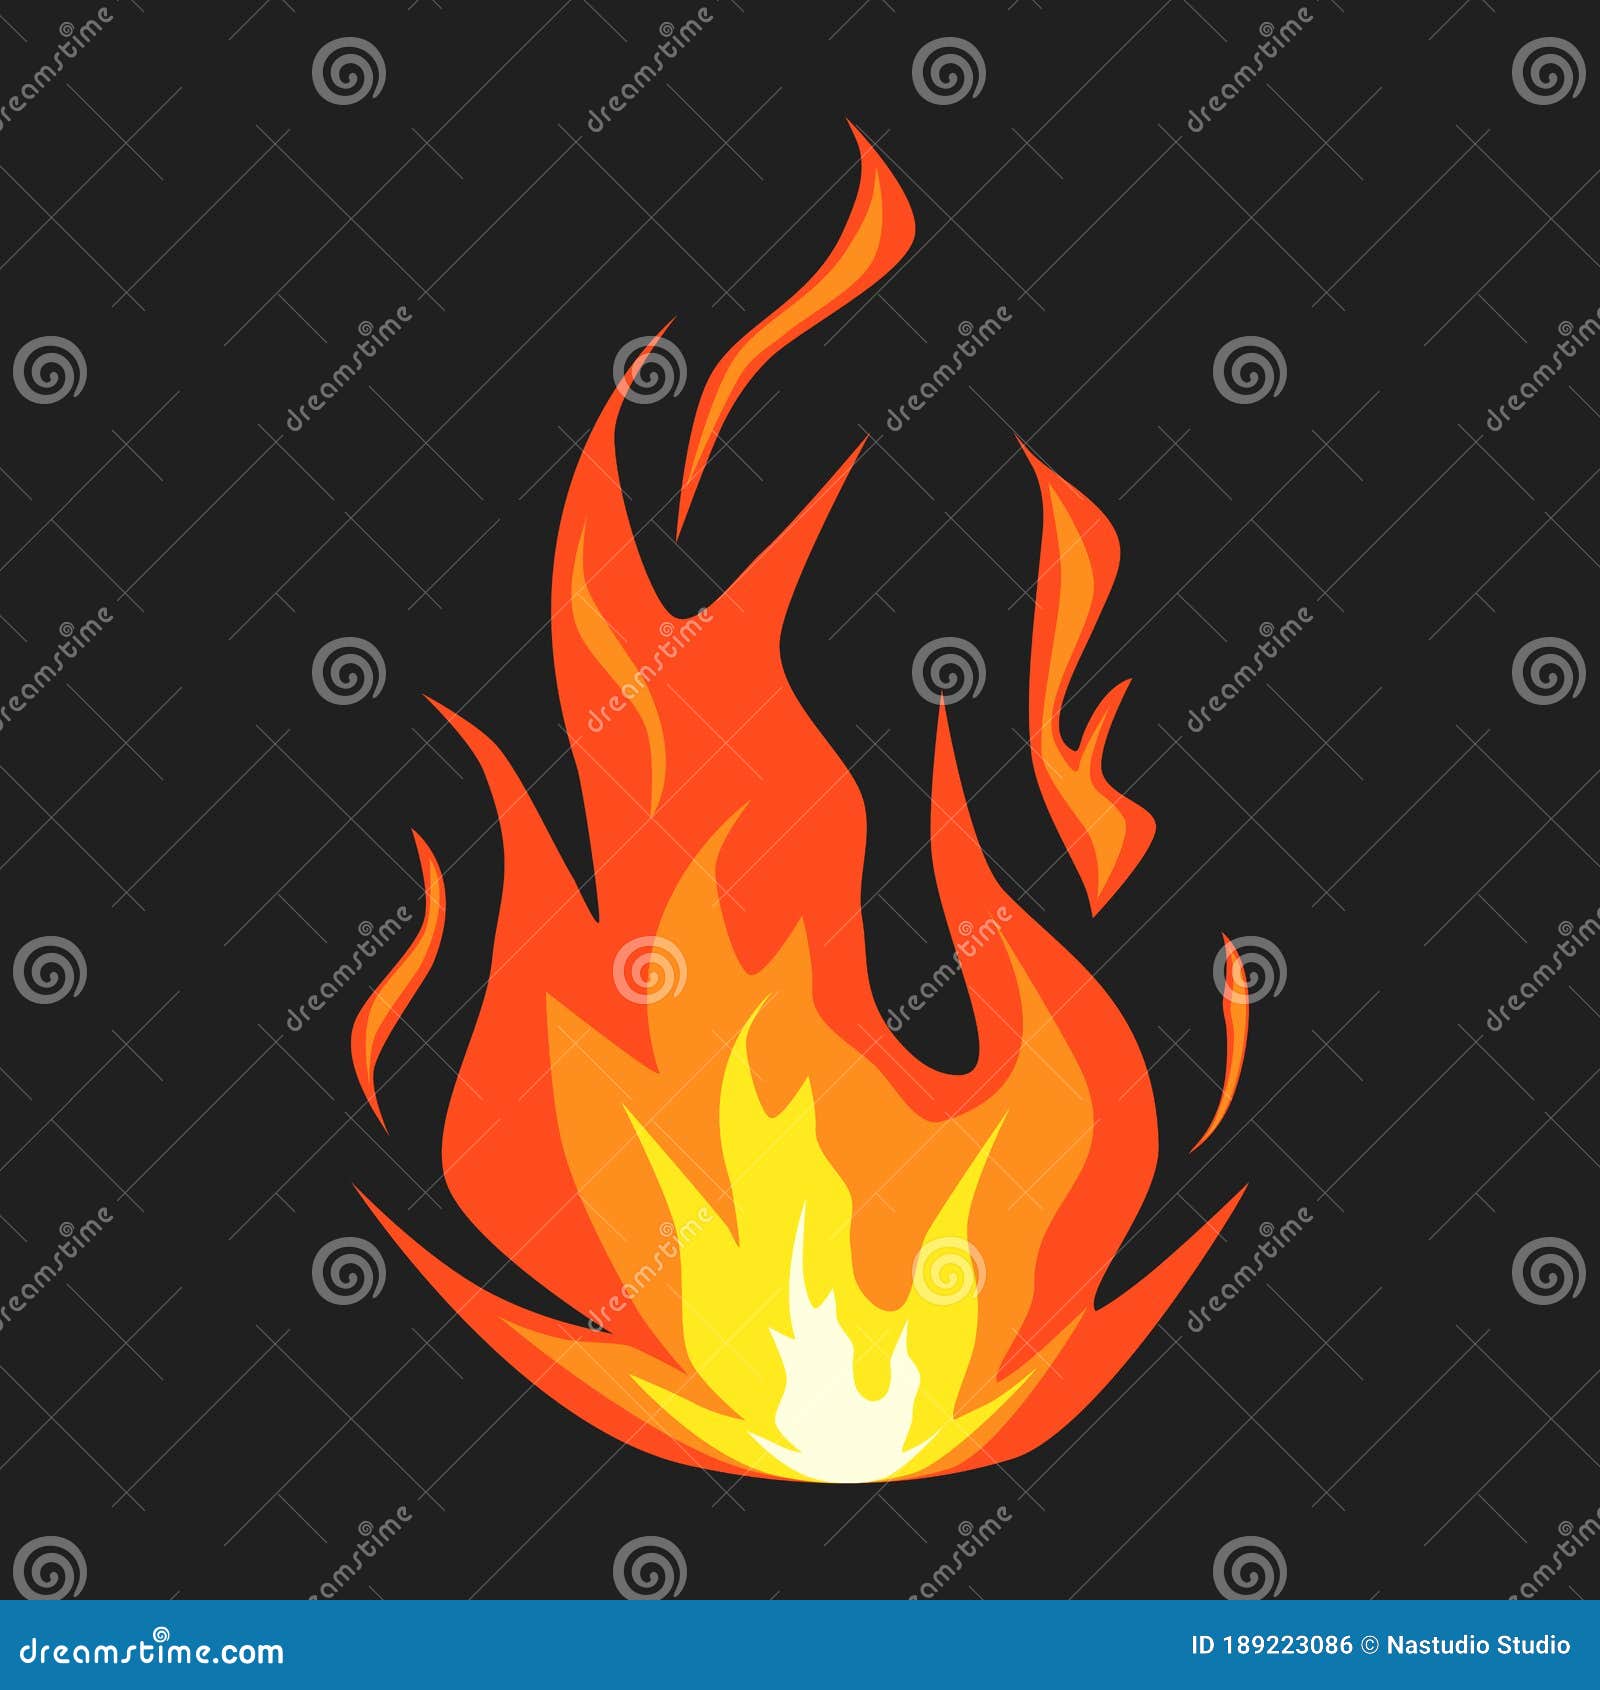 Flame Logo Stock Photos - 231,334 Images | Shutterstock